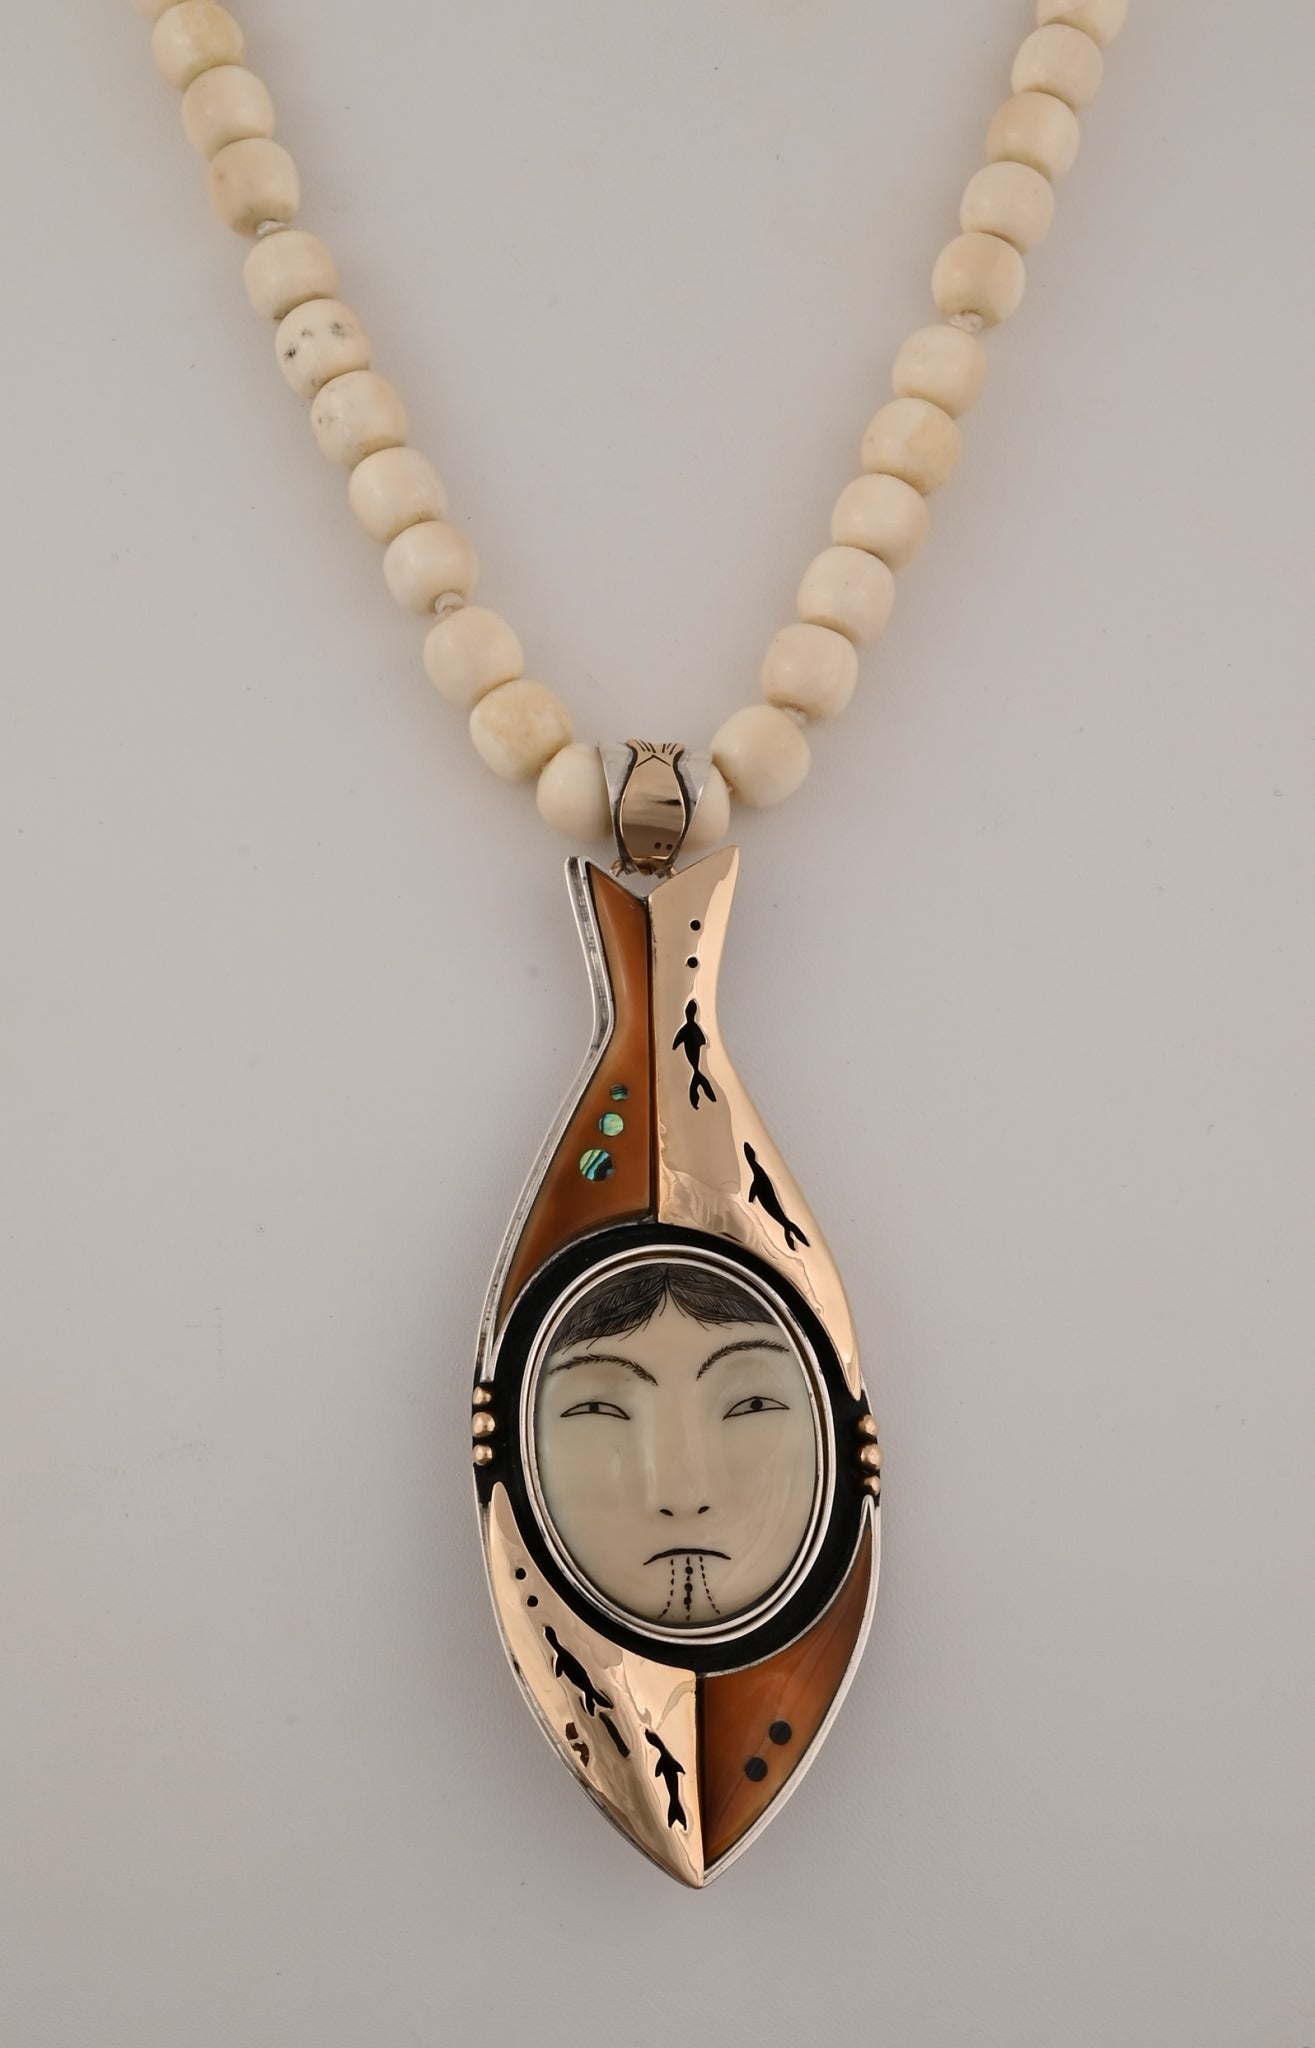 Halibut Pendant with Ivory Bead Necklace by Denise Wallace